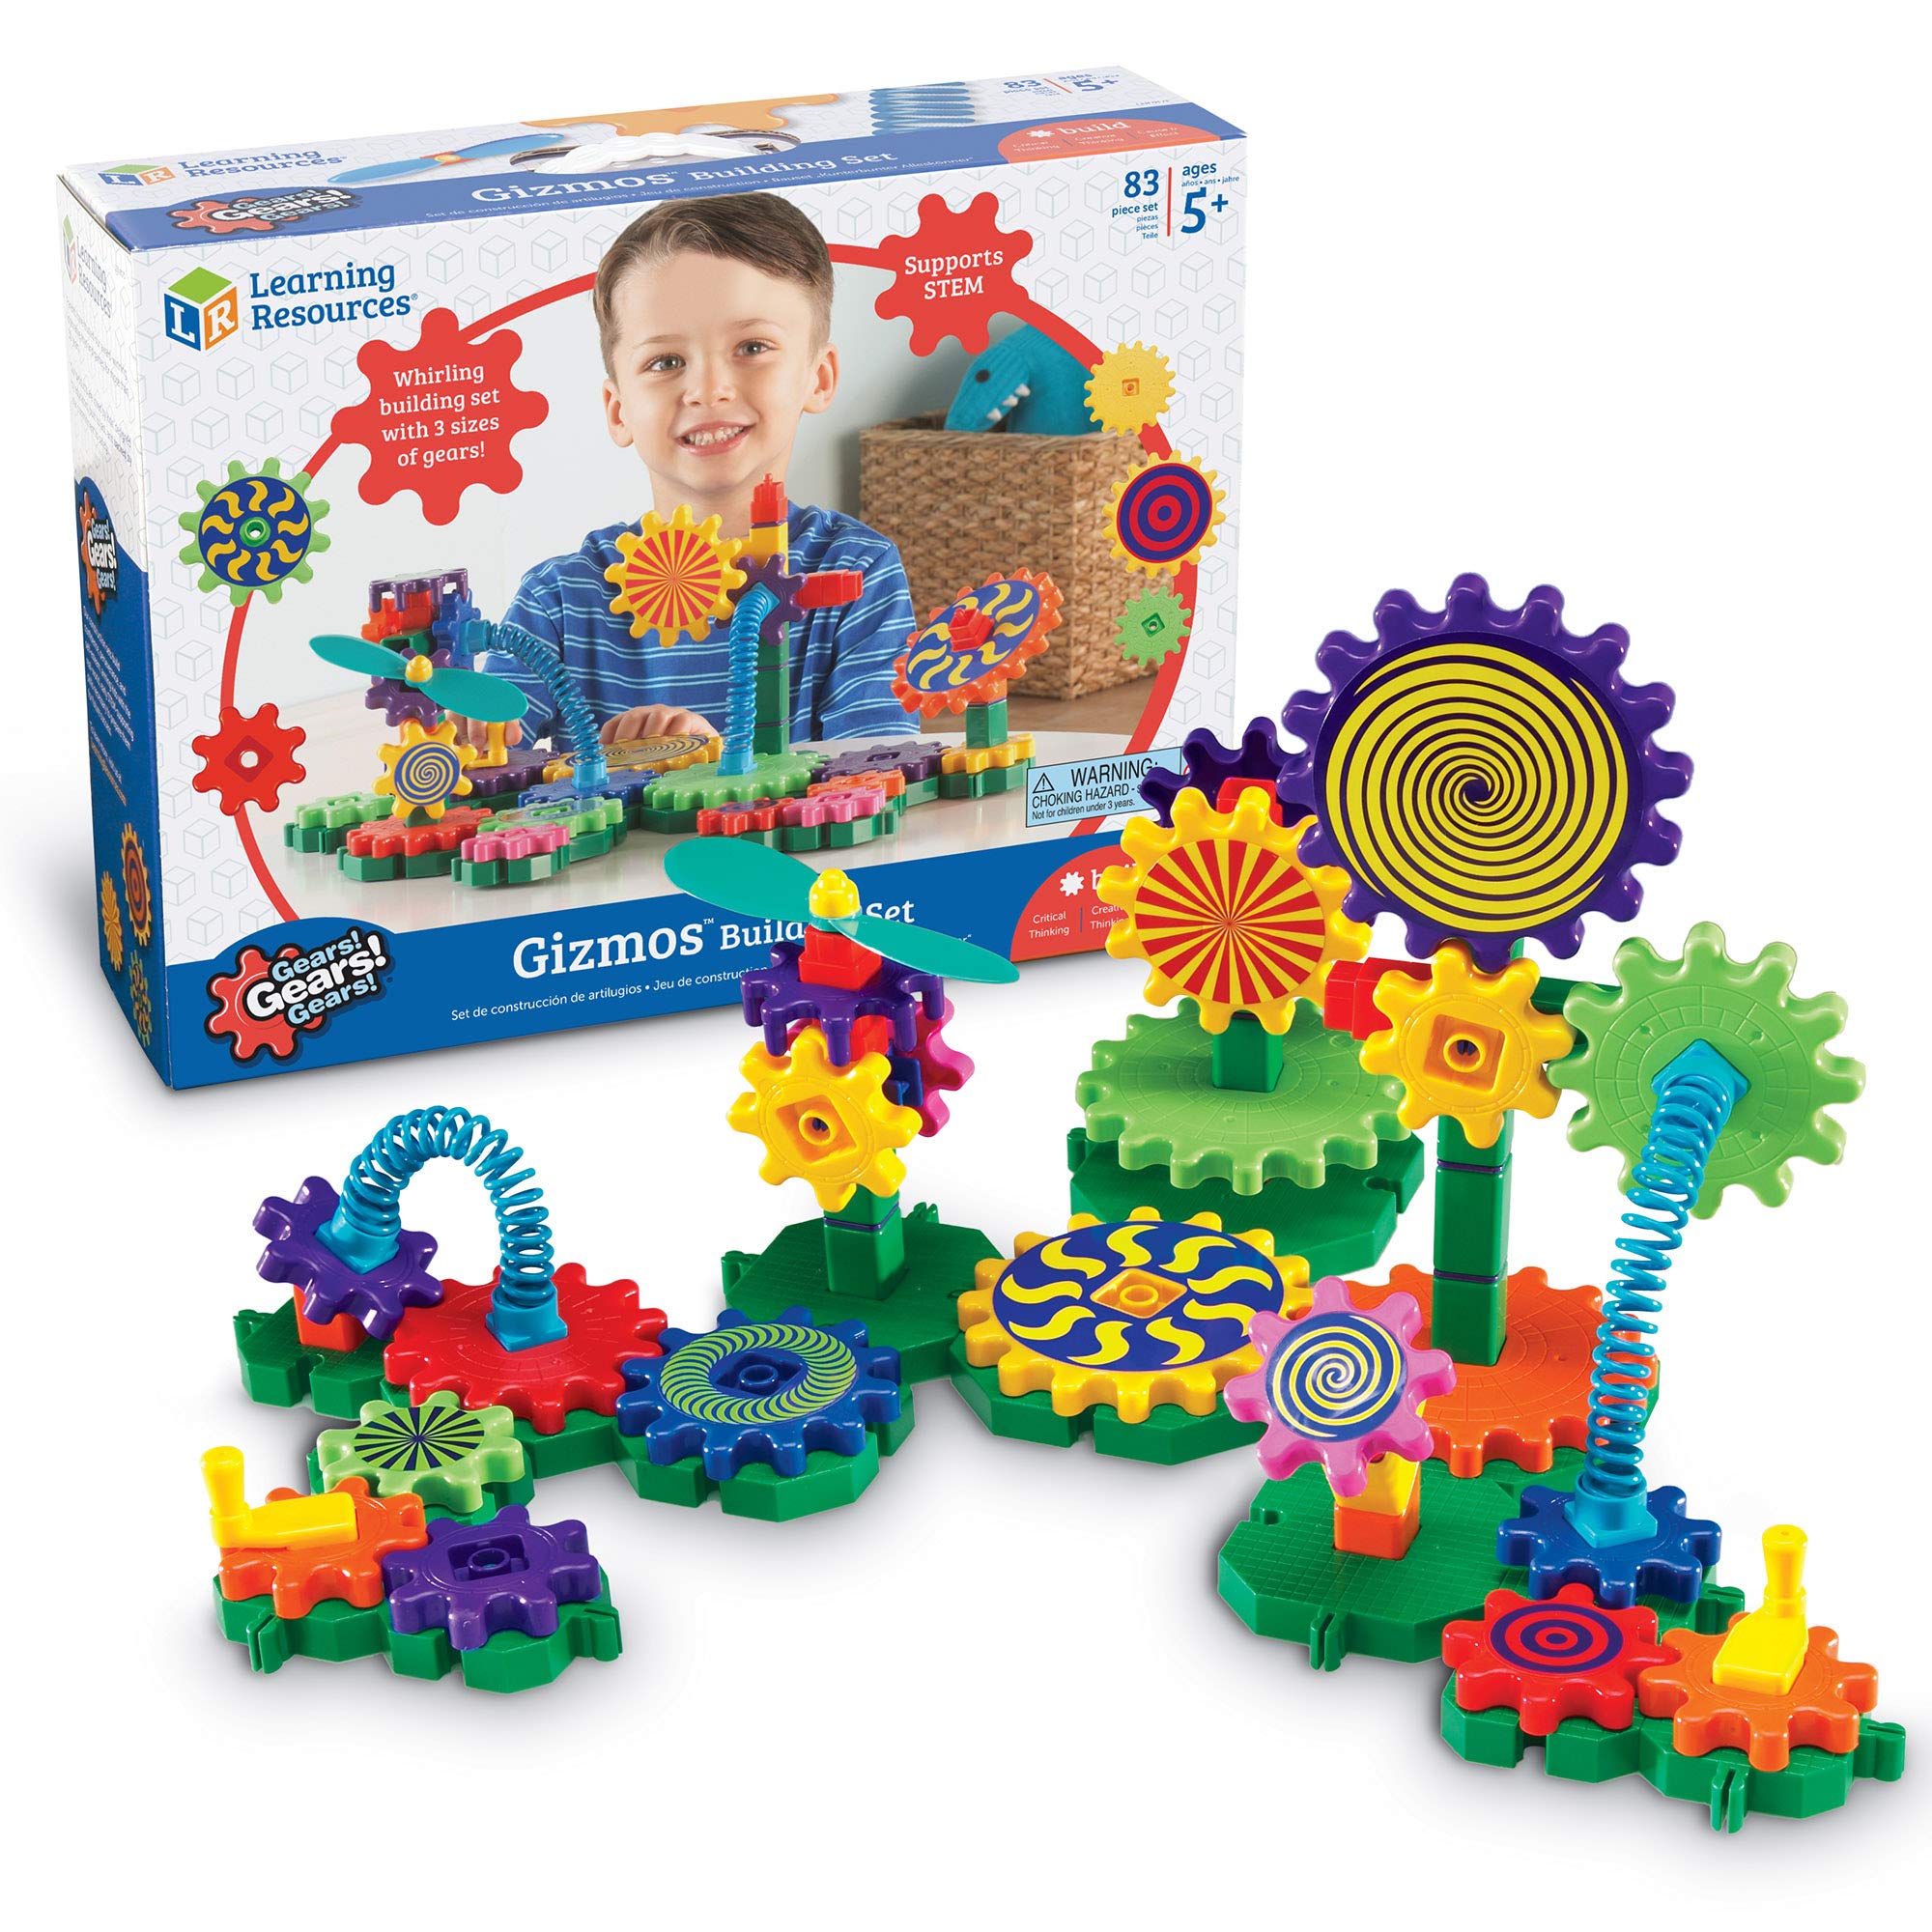 Learning Resources Gears! Gears! Gears! Gizmos Building Set, 83 Pieces, Ages 3+, Construction Toy, STEM Learning Toy,Back to School Gifts